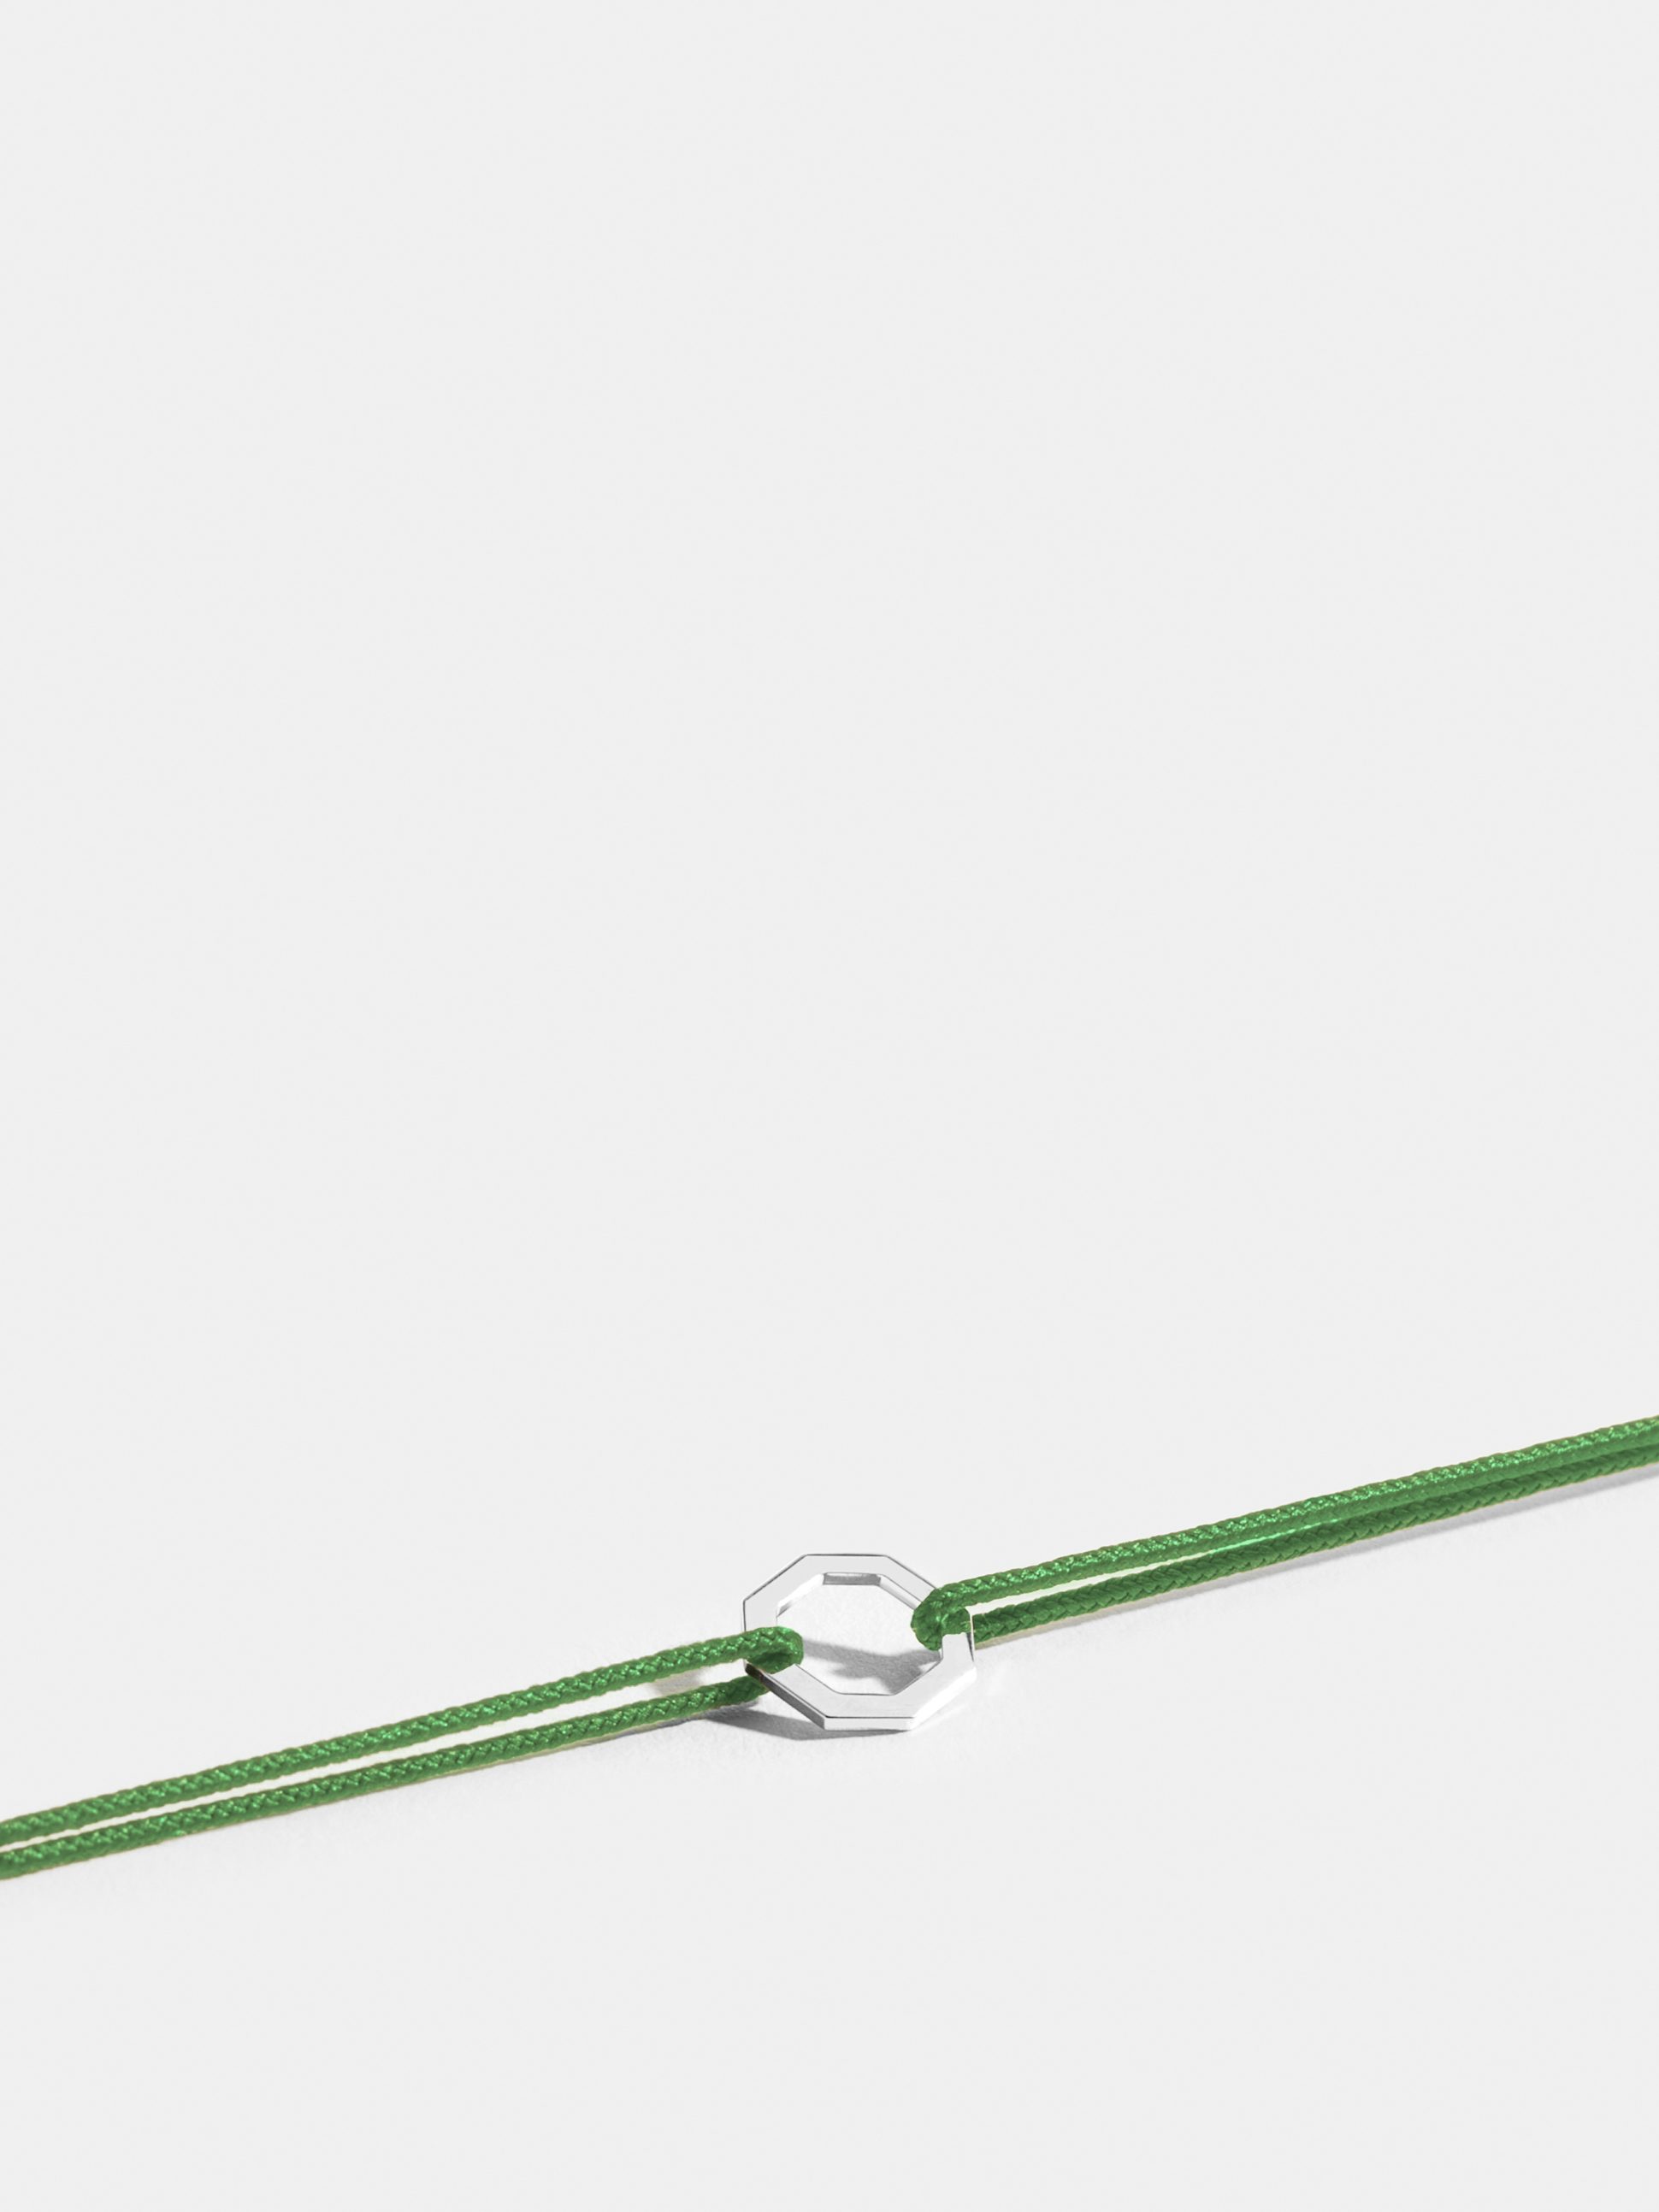 Octogone motif in 18k Fairmined ethical white gold, on an apple green cord. 